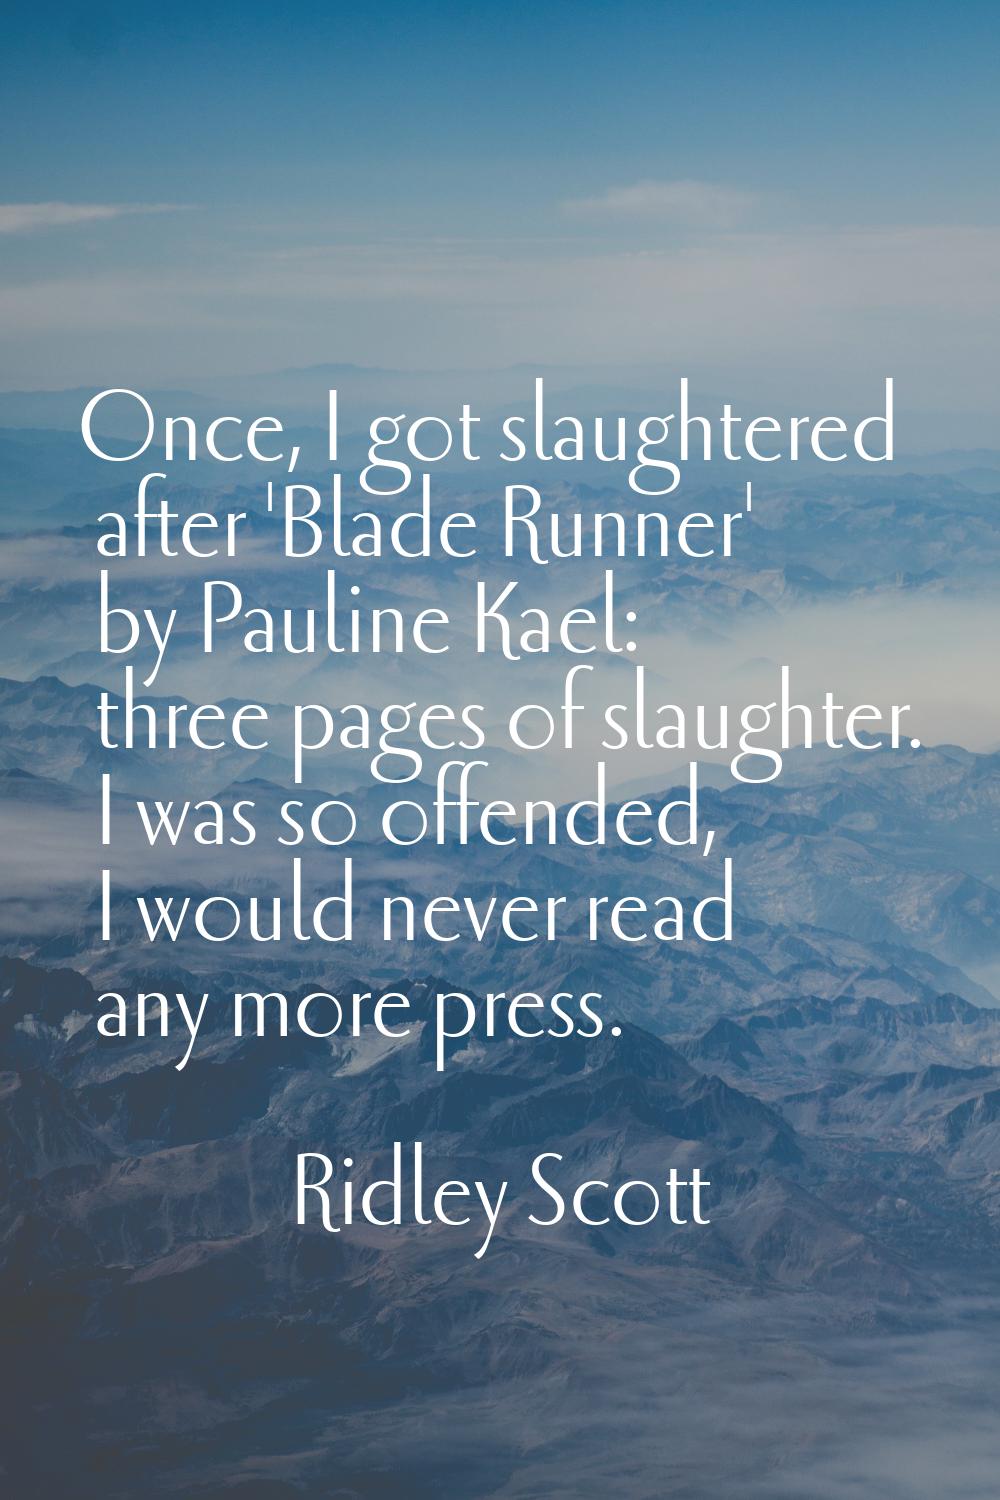 Once, I got slaughtered after 'Blade Runner' by Pauline Kael: three pages of slaughter. I was so of